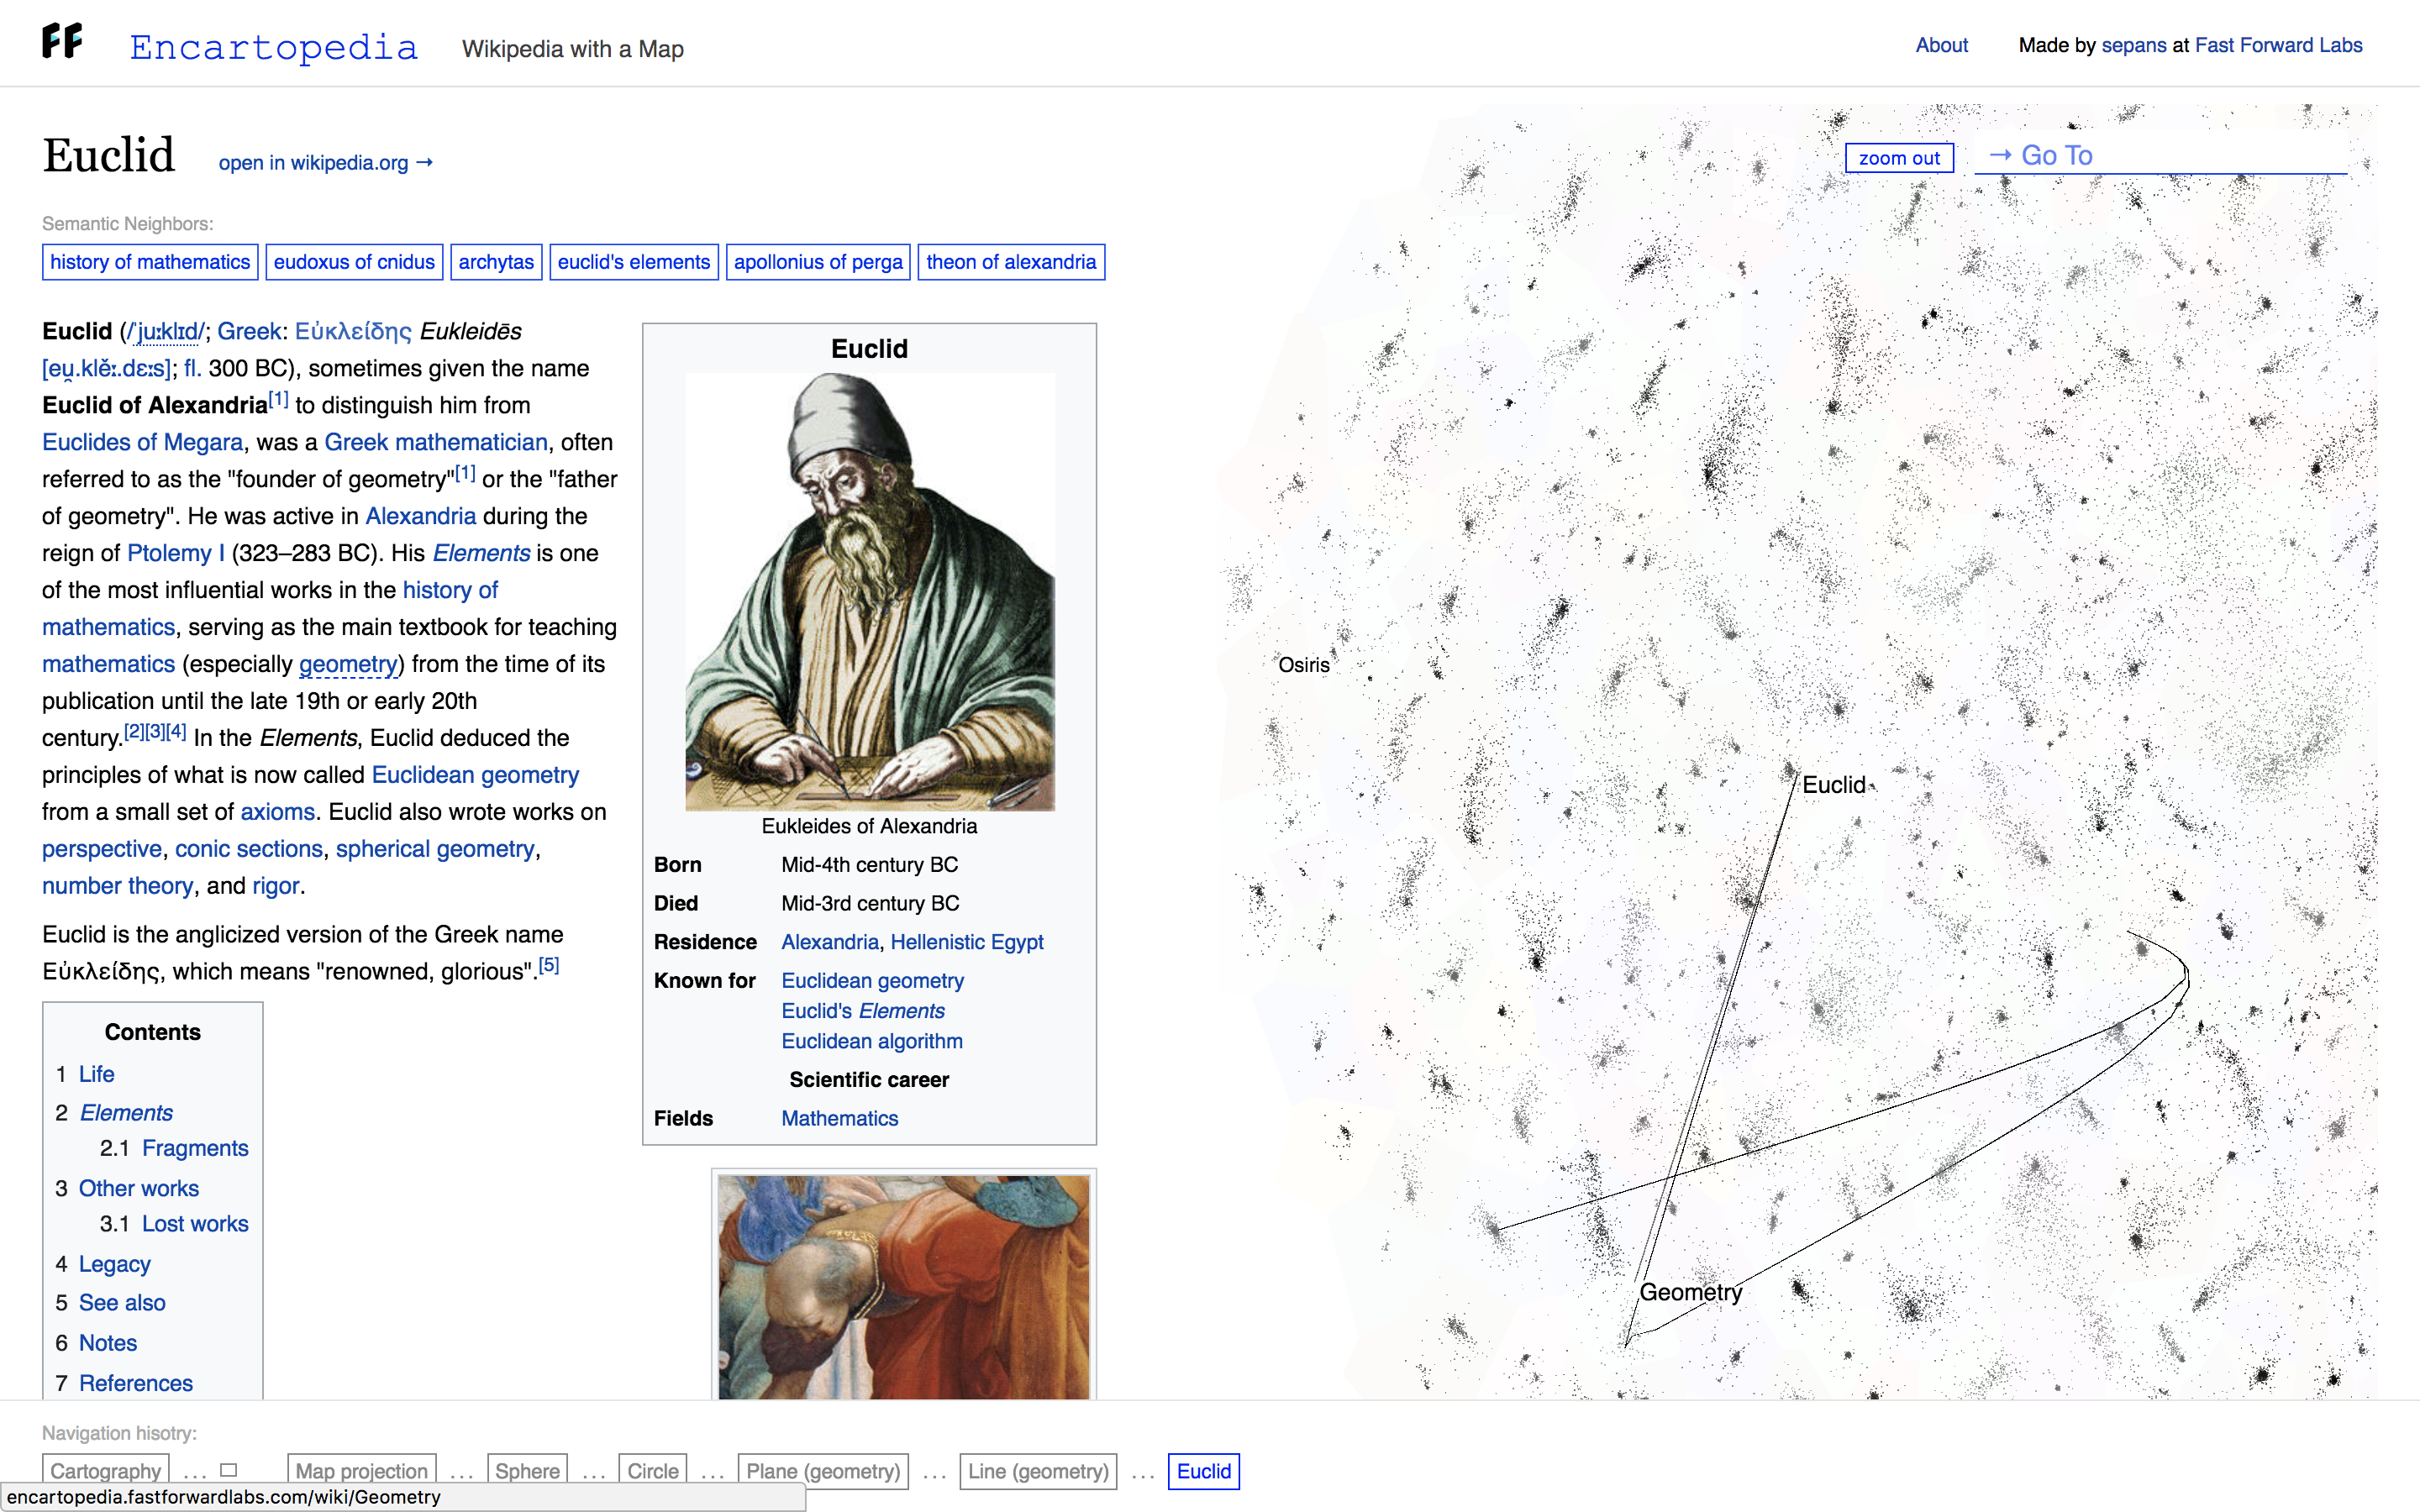 A screenshot of Encartopedia. On the left is the Wikipedia article on Euclid. On the right is a visualization of the articles on Wikipedia and a line showing the user’s journey through other articles to get to the Euclid article.